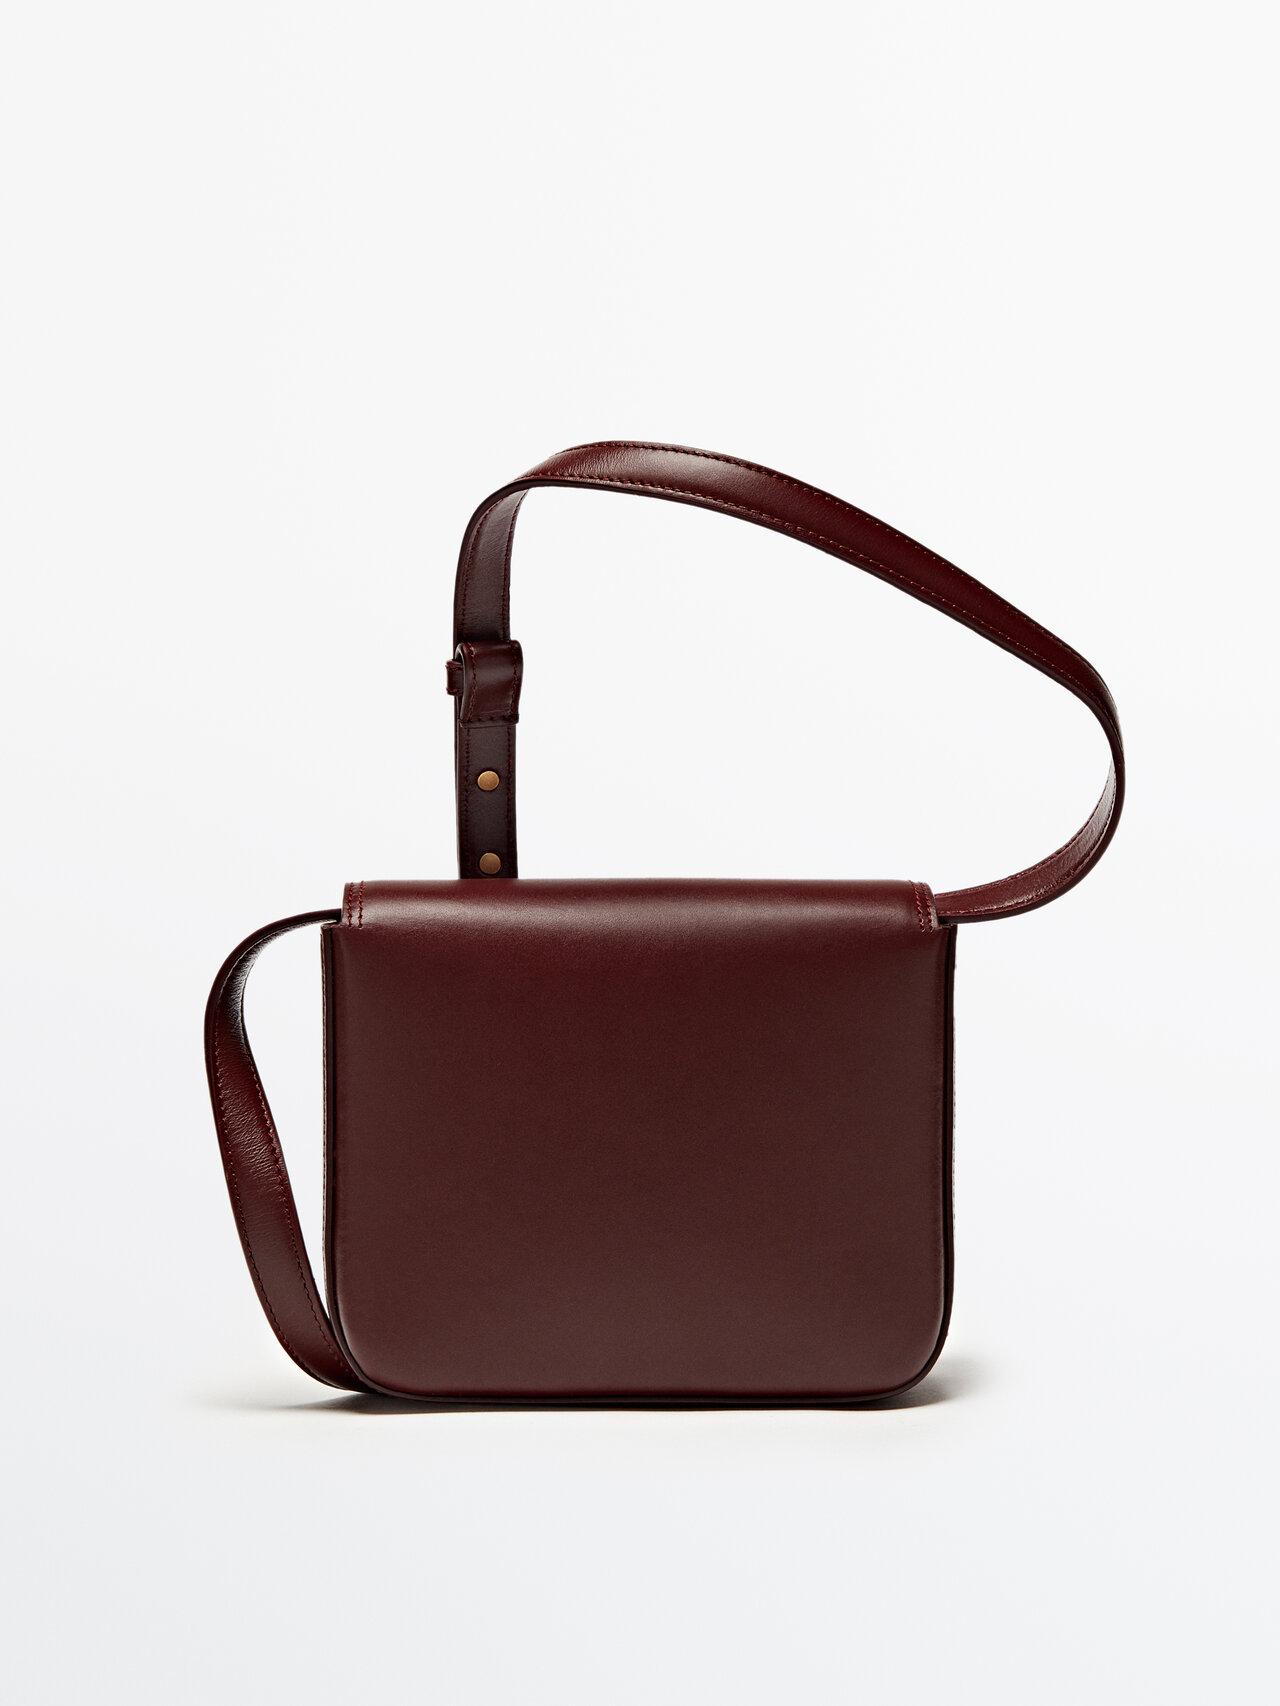 MASSIMO DUTTI Leather Crossbody Bag With Multi-way Strap in Brown | Lyst